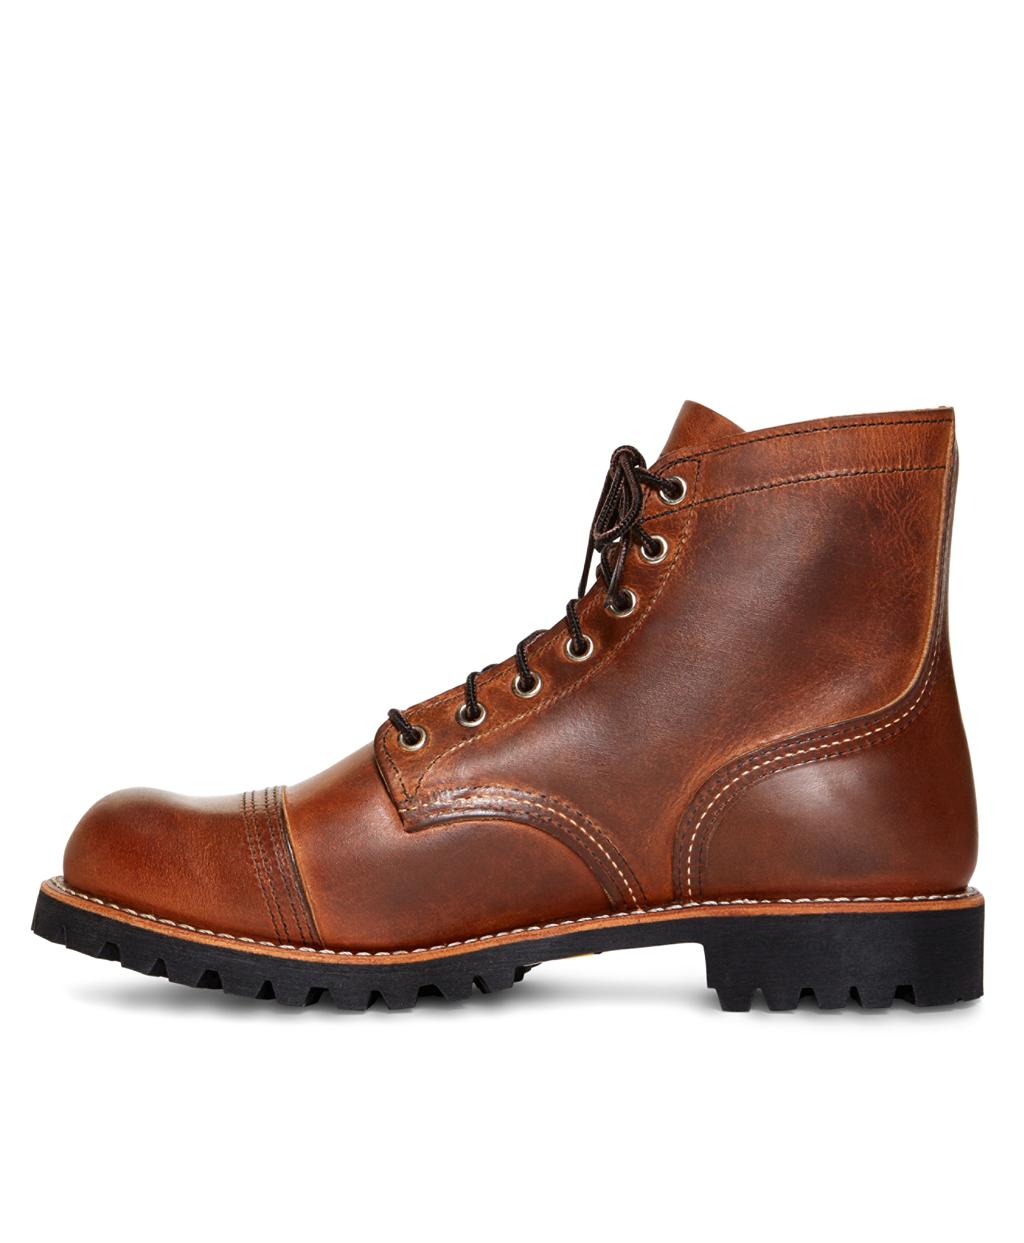 Lyst - Brooks Brothers Red Wing For 4556 Iron Ranger Boots in Brown for Men